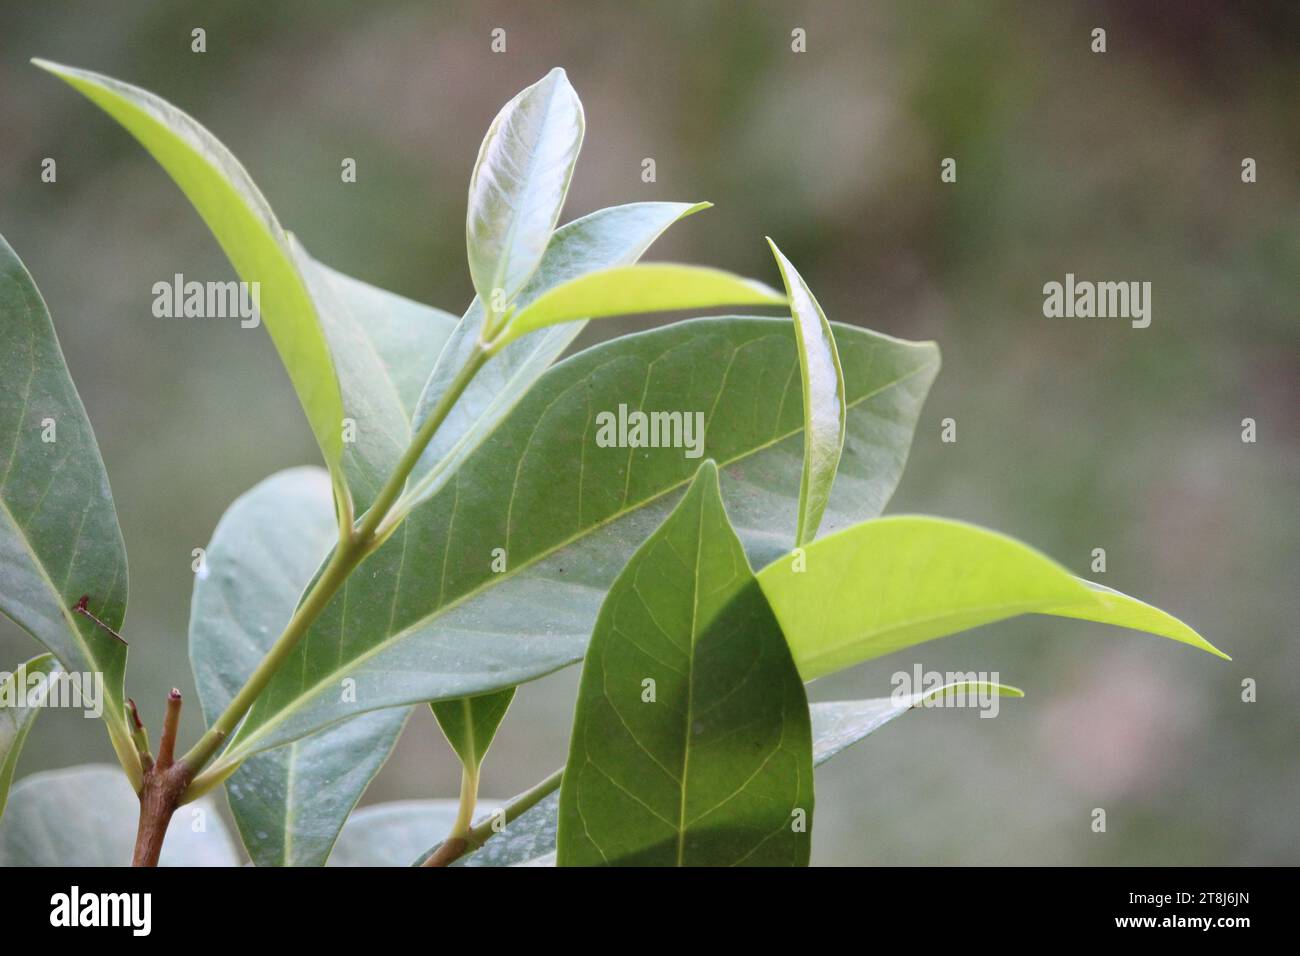 Bay leaves or Indonesian bay-leaf or Indonesian laurel or Syzygium polyanthum leaves are suitable for food seasoning and herbal medicine Stock Photo